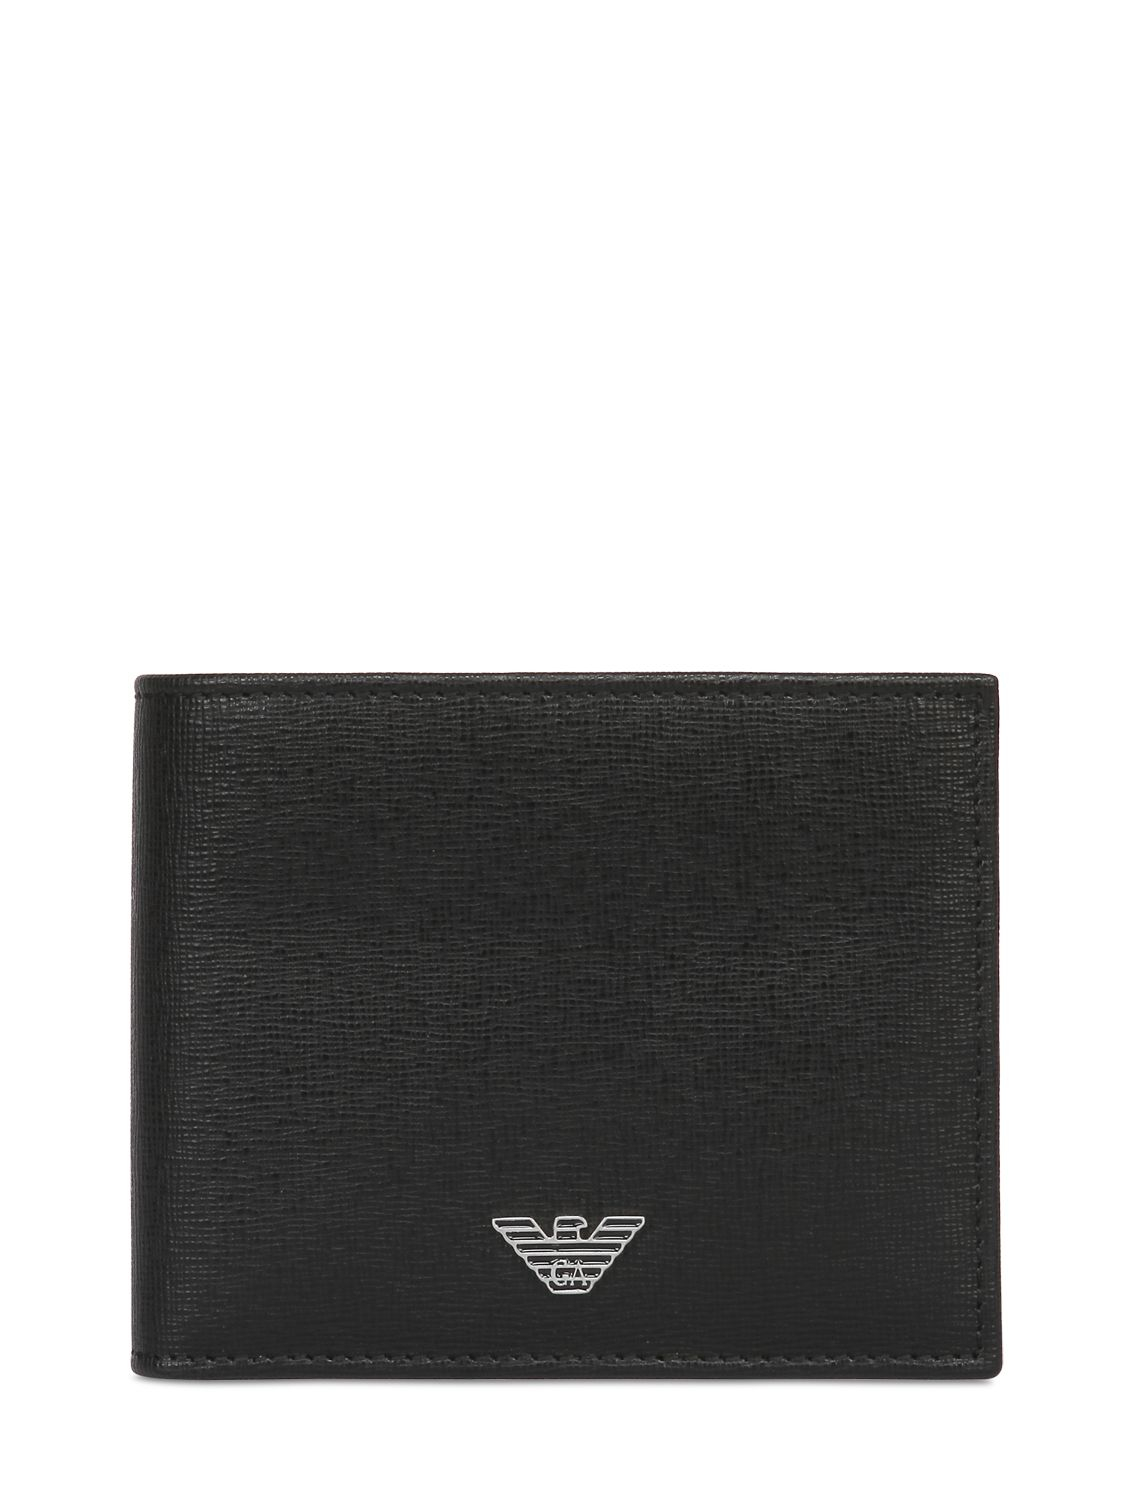 armani wallet with coin pocket